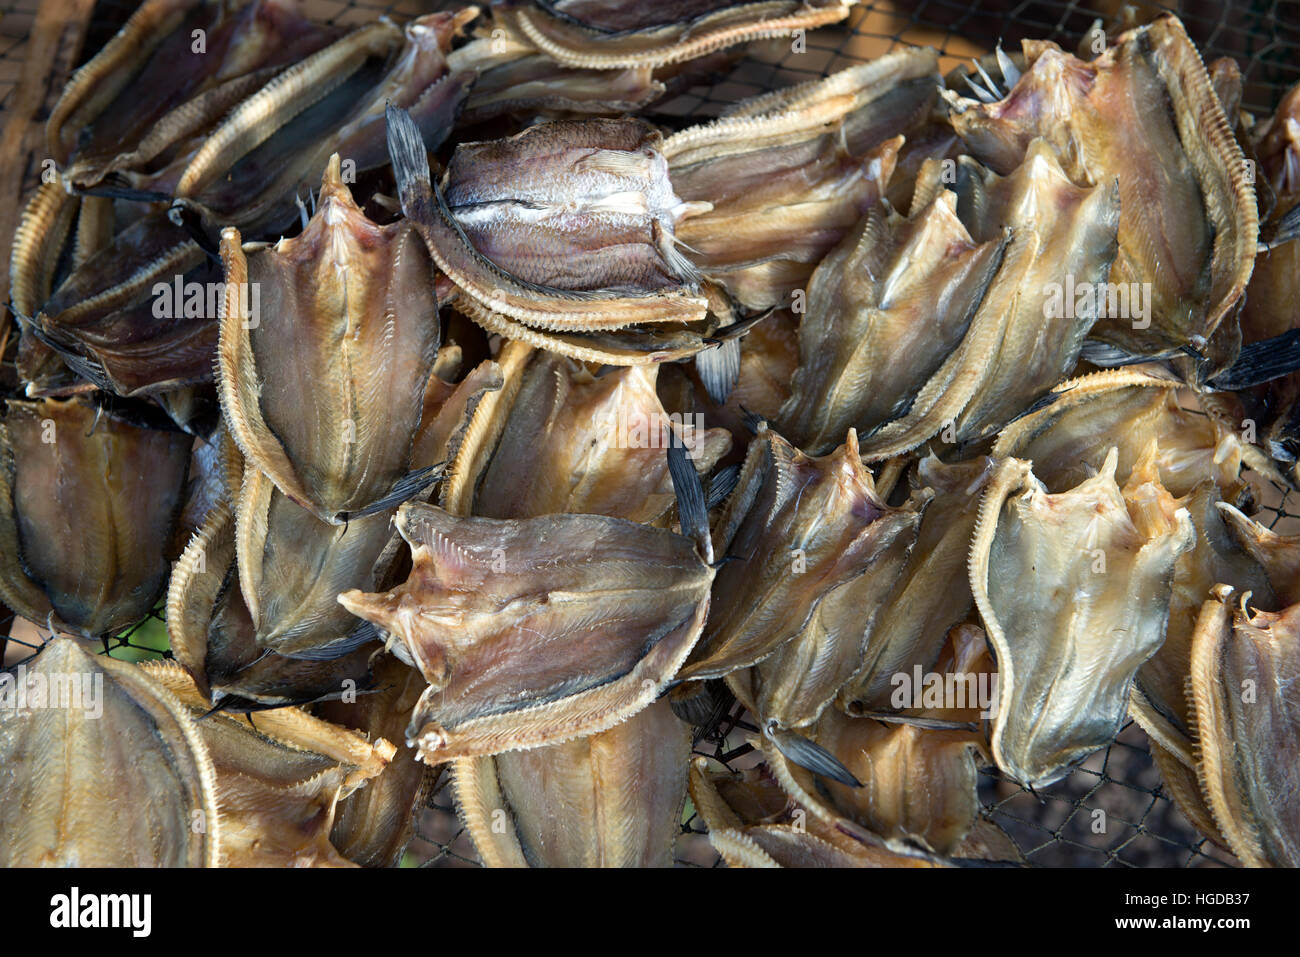 Thailand, Southern, Drying of fishies of lake Stock Photo